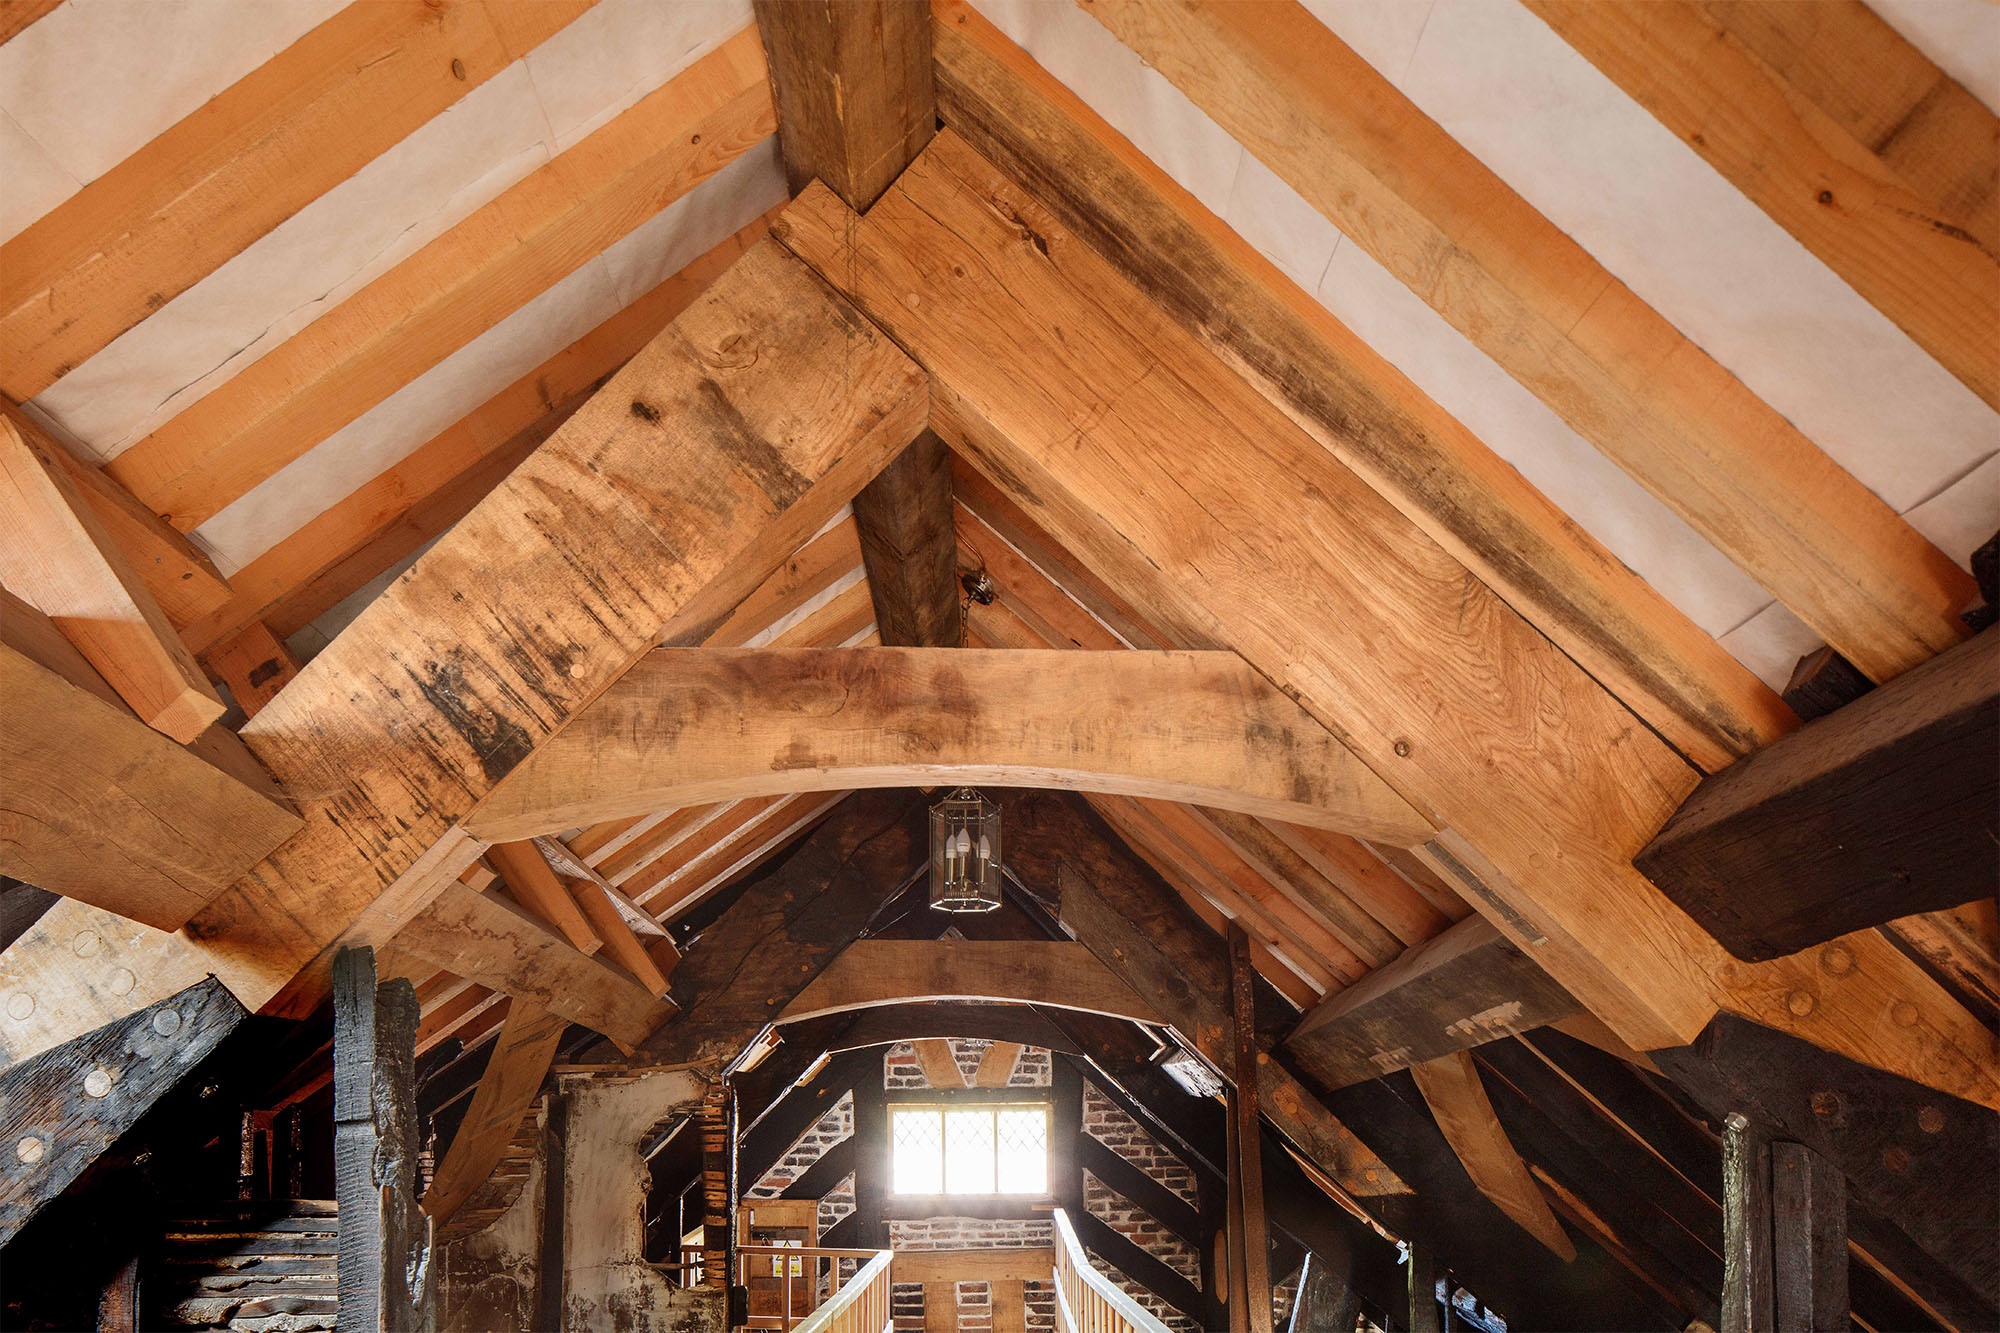 Wooden beams in a timber roof - some new, some blackened by fire.